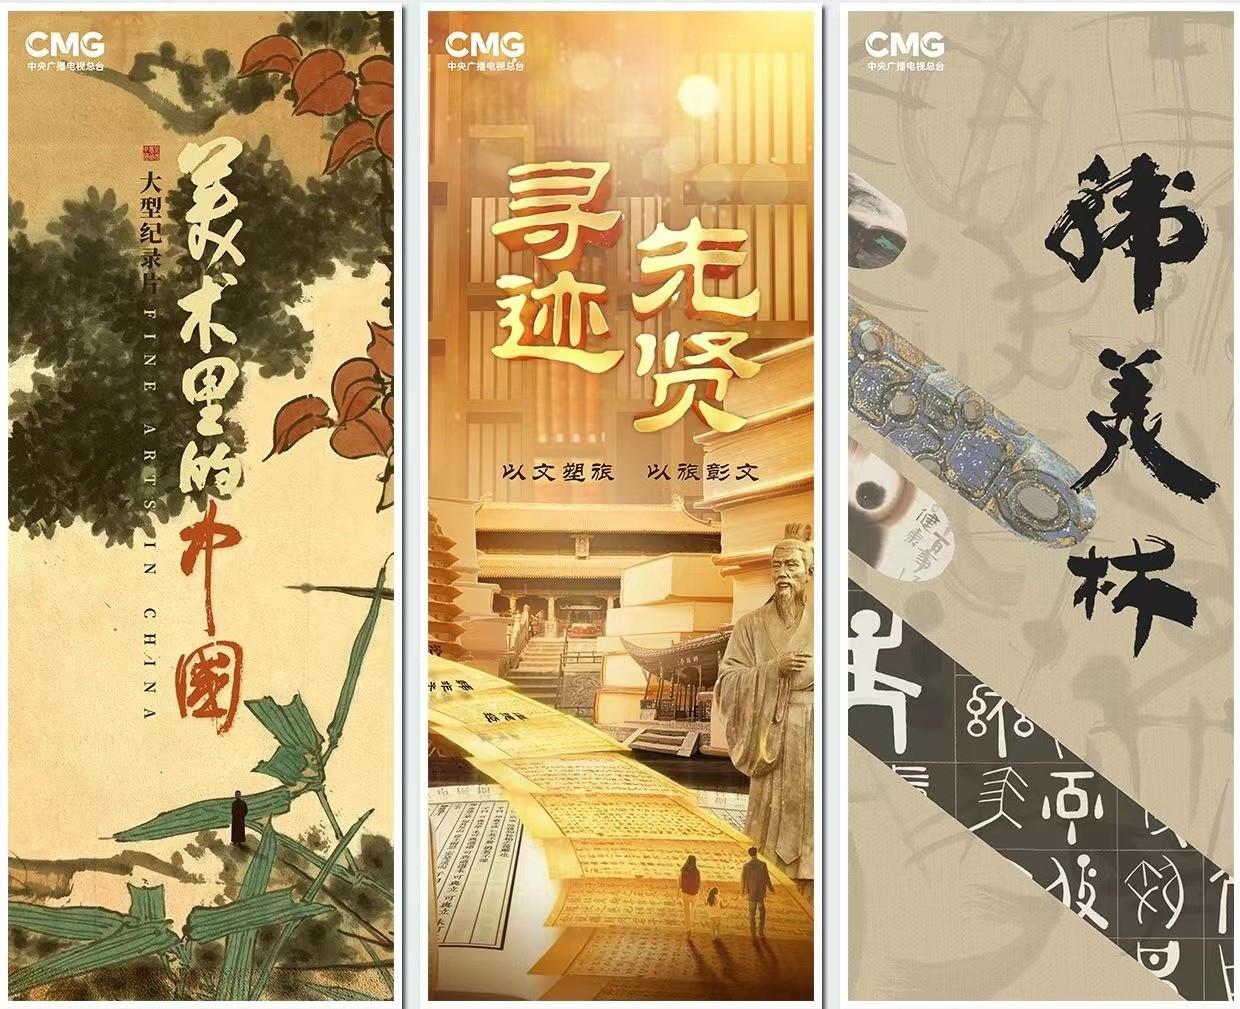 Three programs showing Chinese art and culture. /CMG